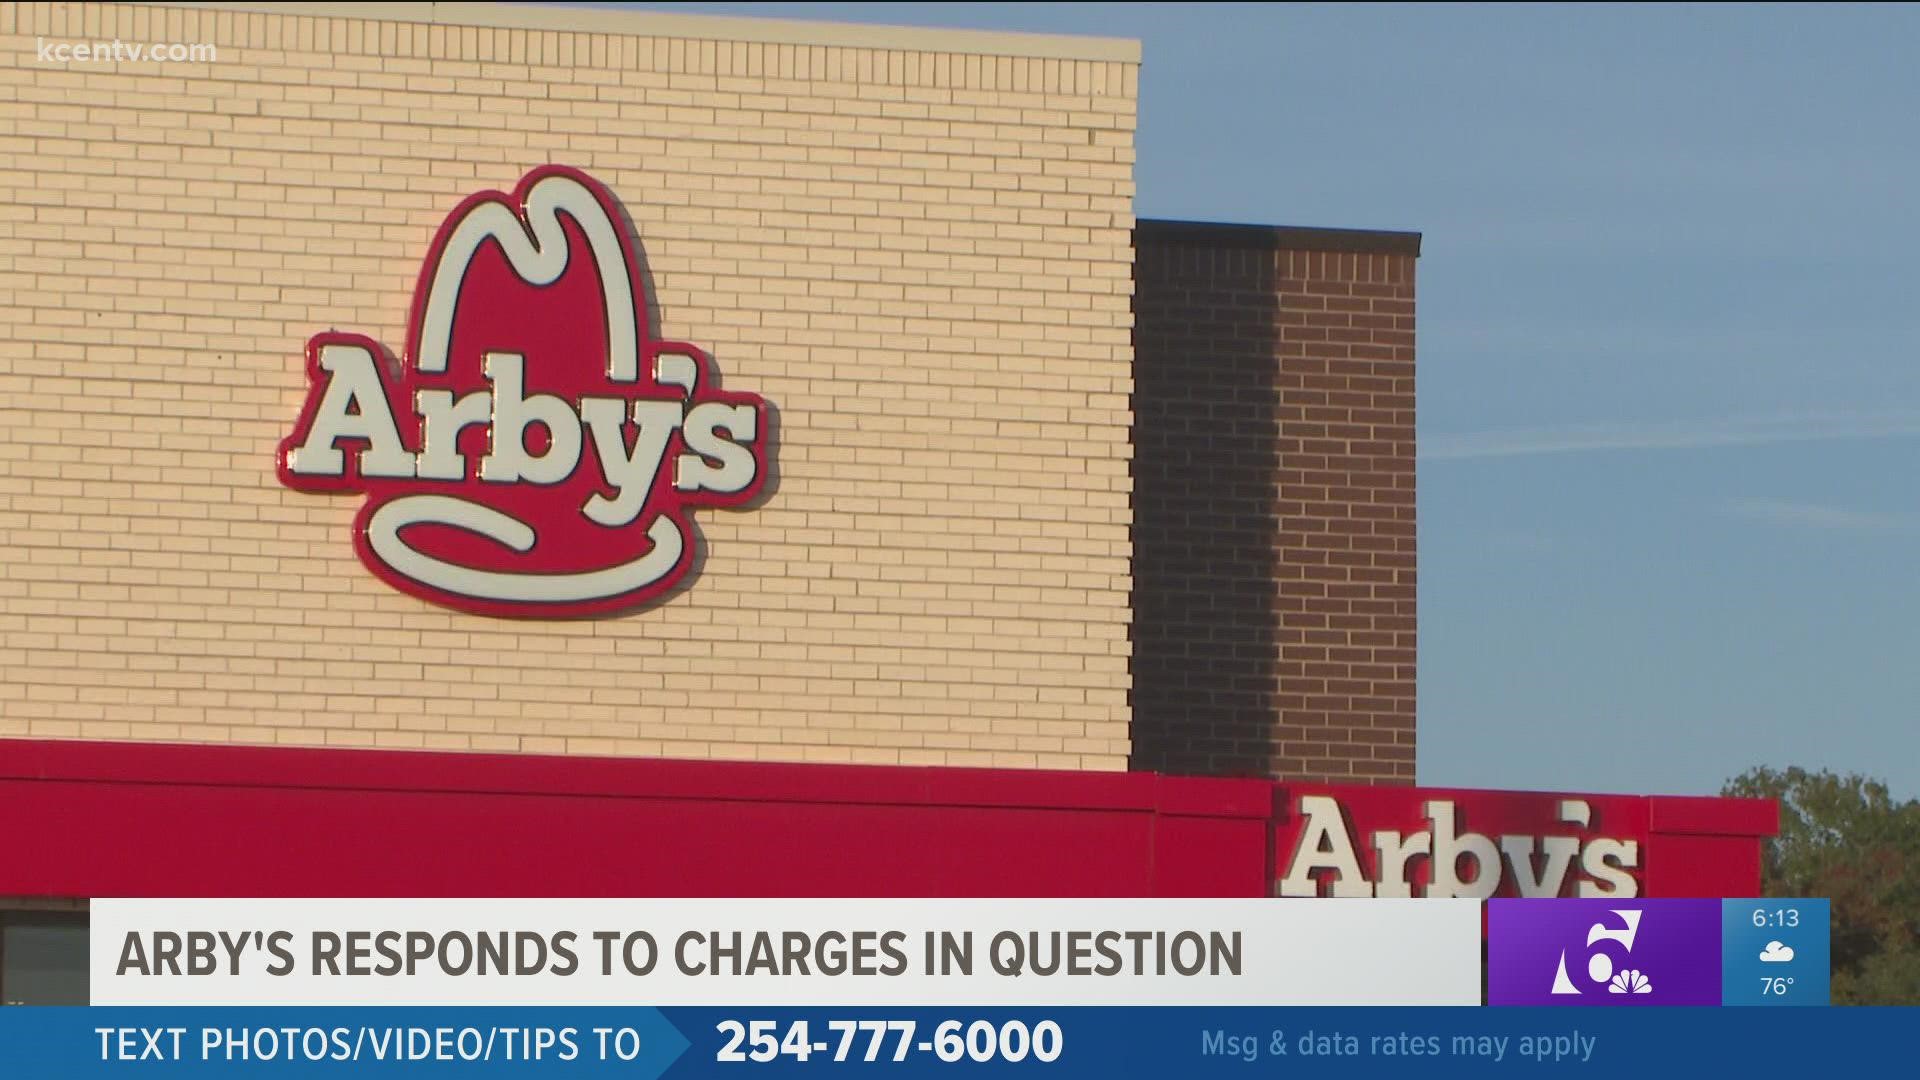 In a statement, the restaurant chain told 6 News that the charges were due to an "unforeseen credit card processing issue."